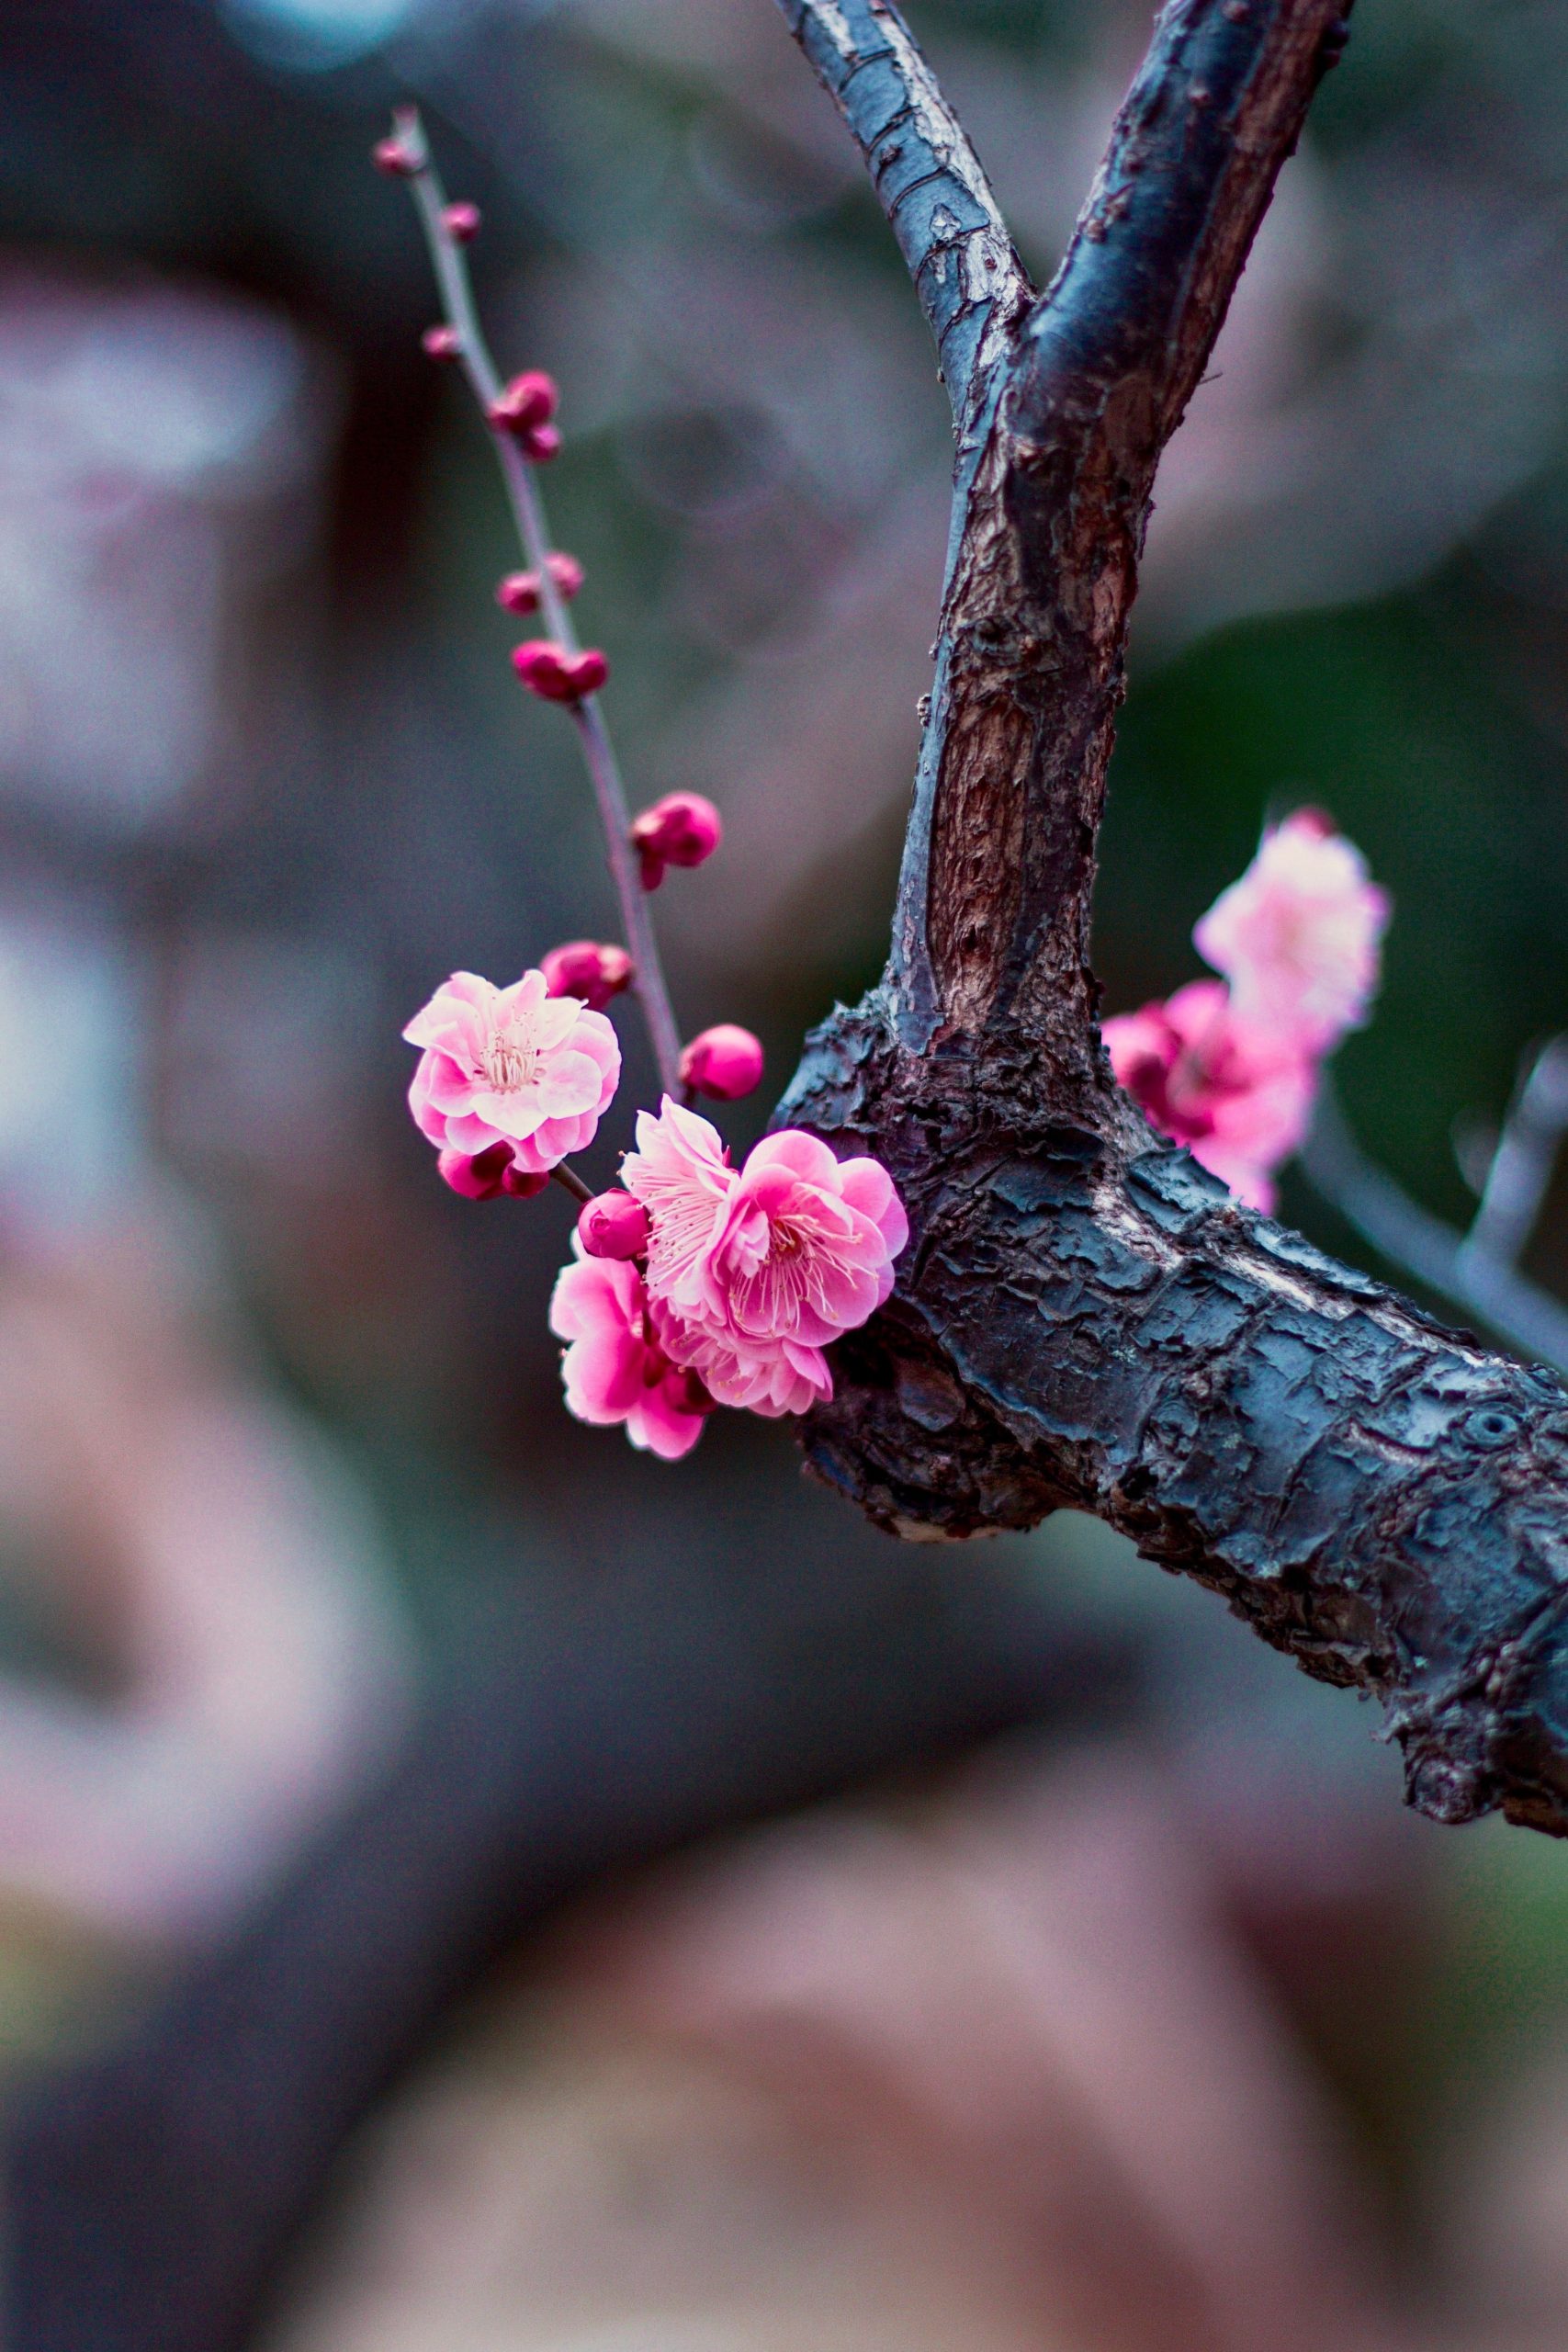 When Do Apricot Trees Bloom? (Does It Vary With Different Cultivars?)